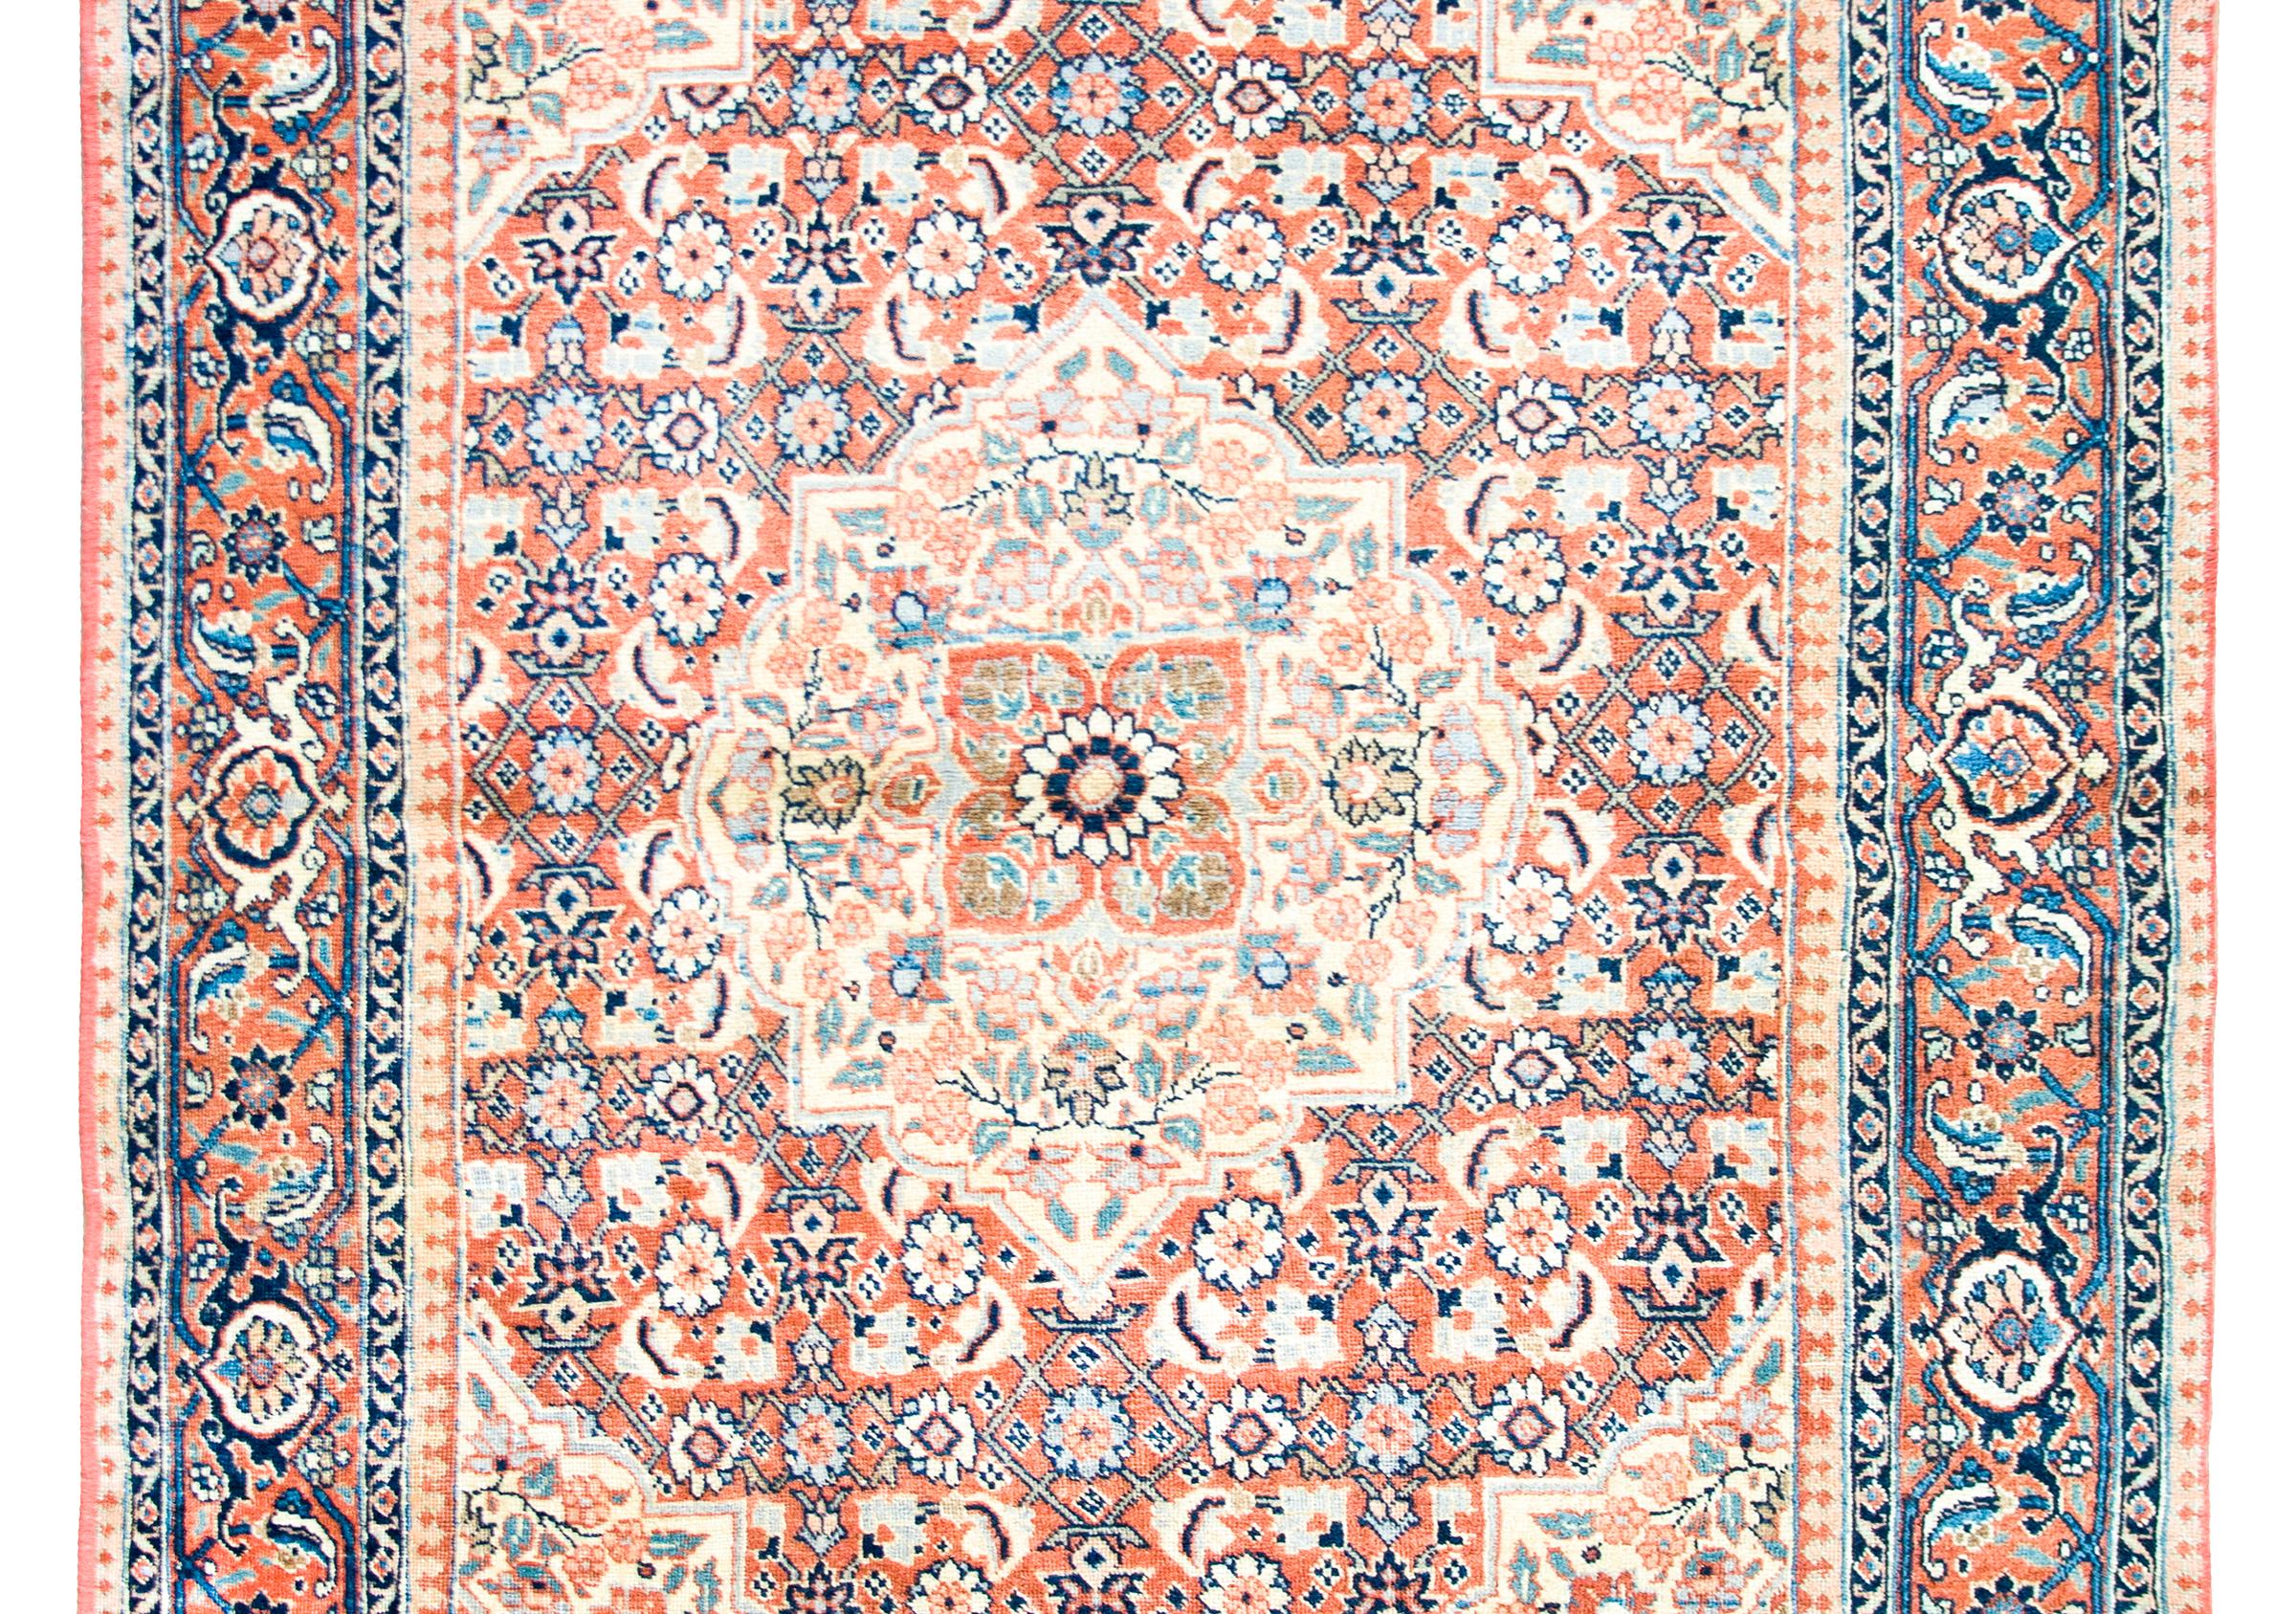 A beautiful early 20th century Persian Tabriz rug with a small central floral medallion living amidst several more medallions, each with their own unique repeated floral patterns, and surrounded by a complex border with a wide central floral